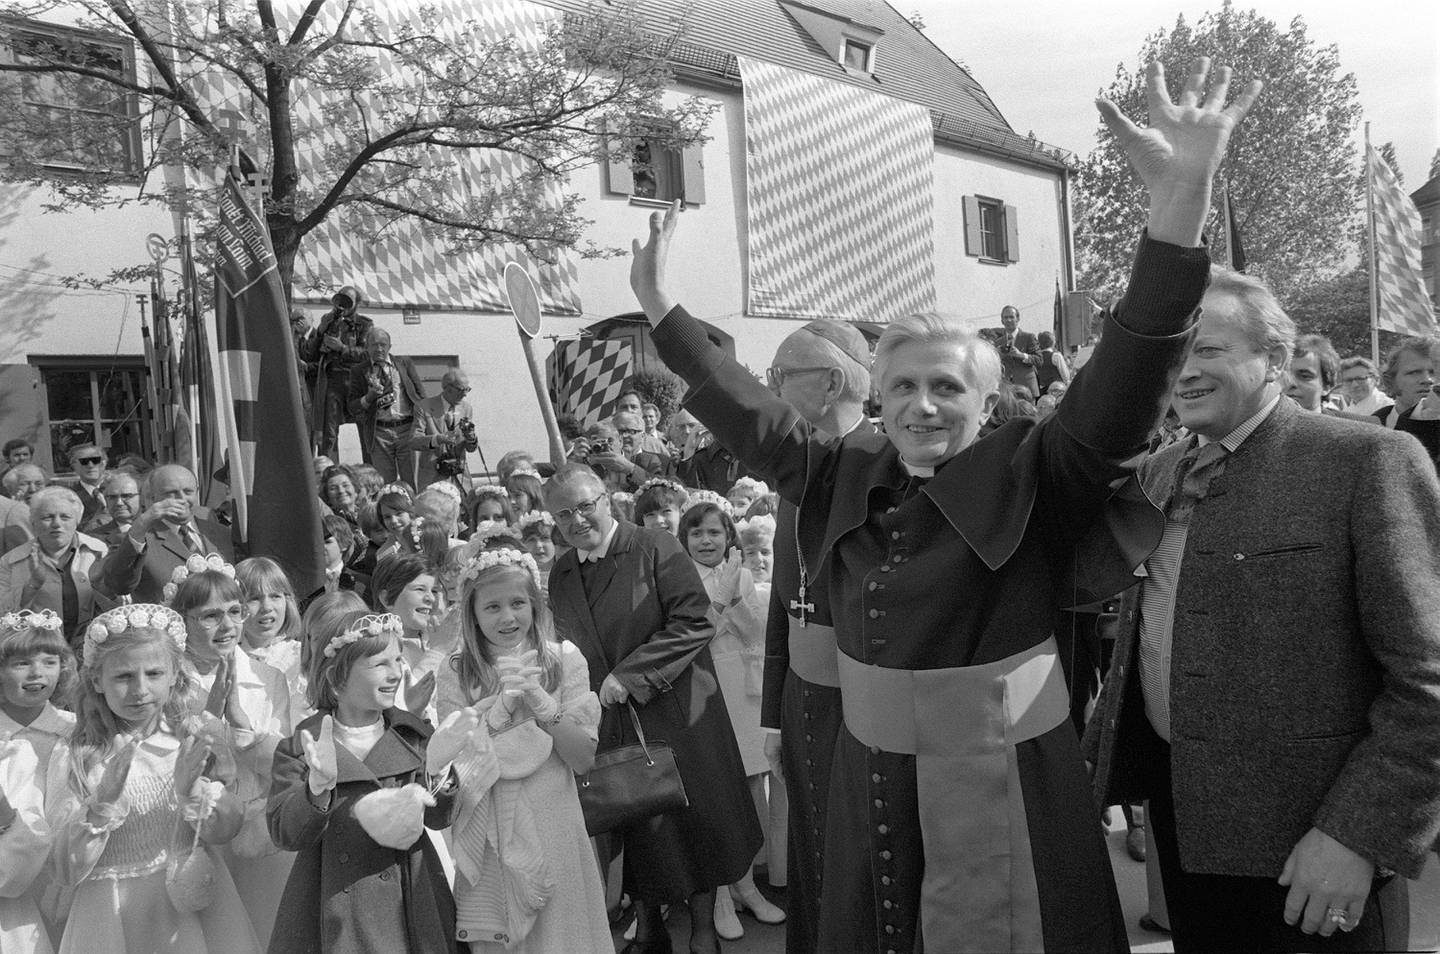 Joseph Ratzinger, the new archbishop of Munich and Freising, raises his arms to greet hundreds of believers at his arrival in the Bavarian capital Munich, Germany, on May 23, 1977. (AP Photo/Diether Endlicher)